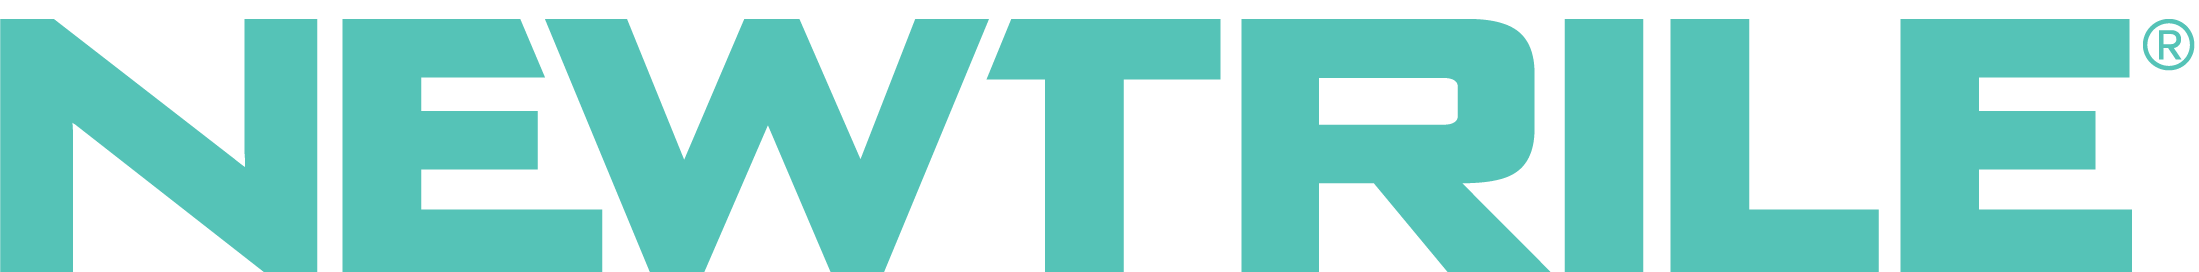 core-family-logos_Newtrile-teal_Newtrile-1.png